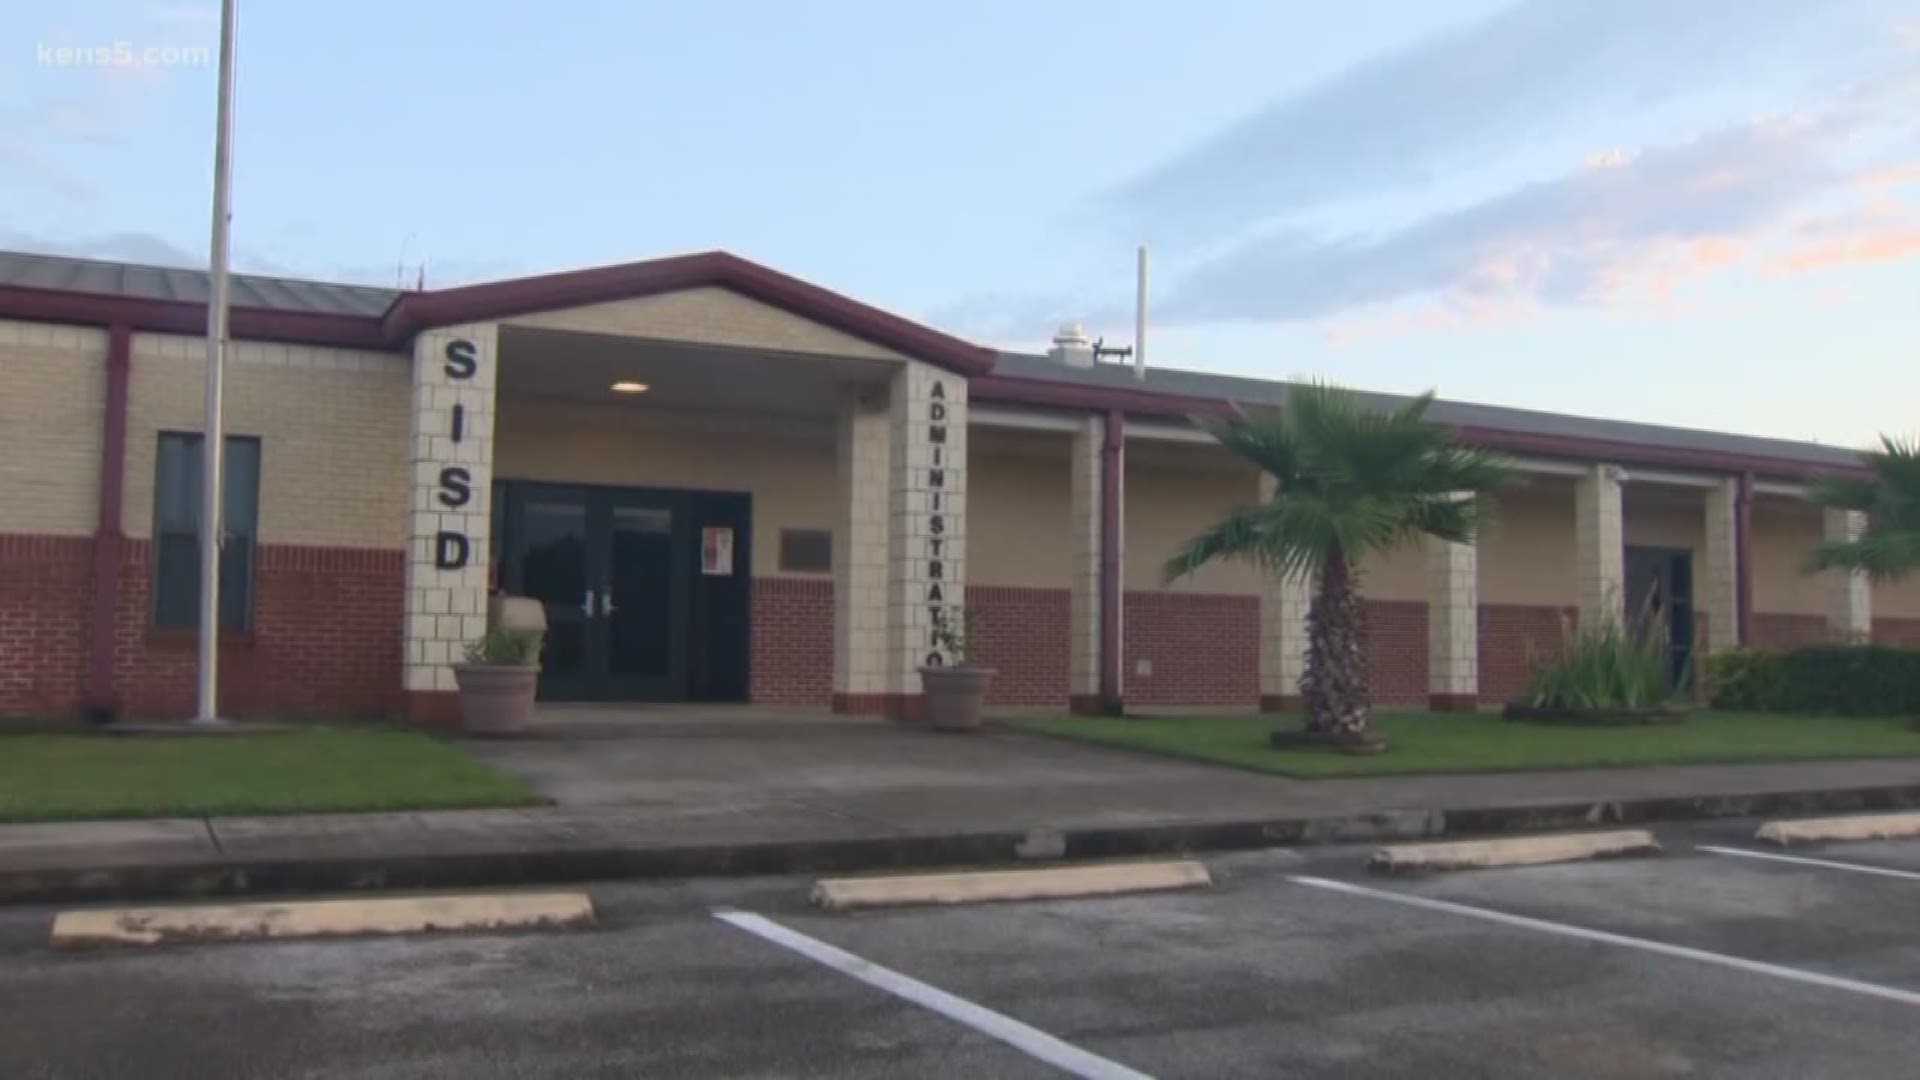 SISD administrators are considering working with BCSO to provide campus security, but some parents are perplexed by the idea.